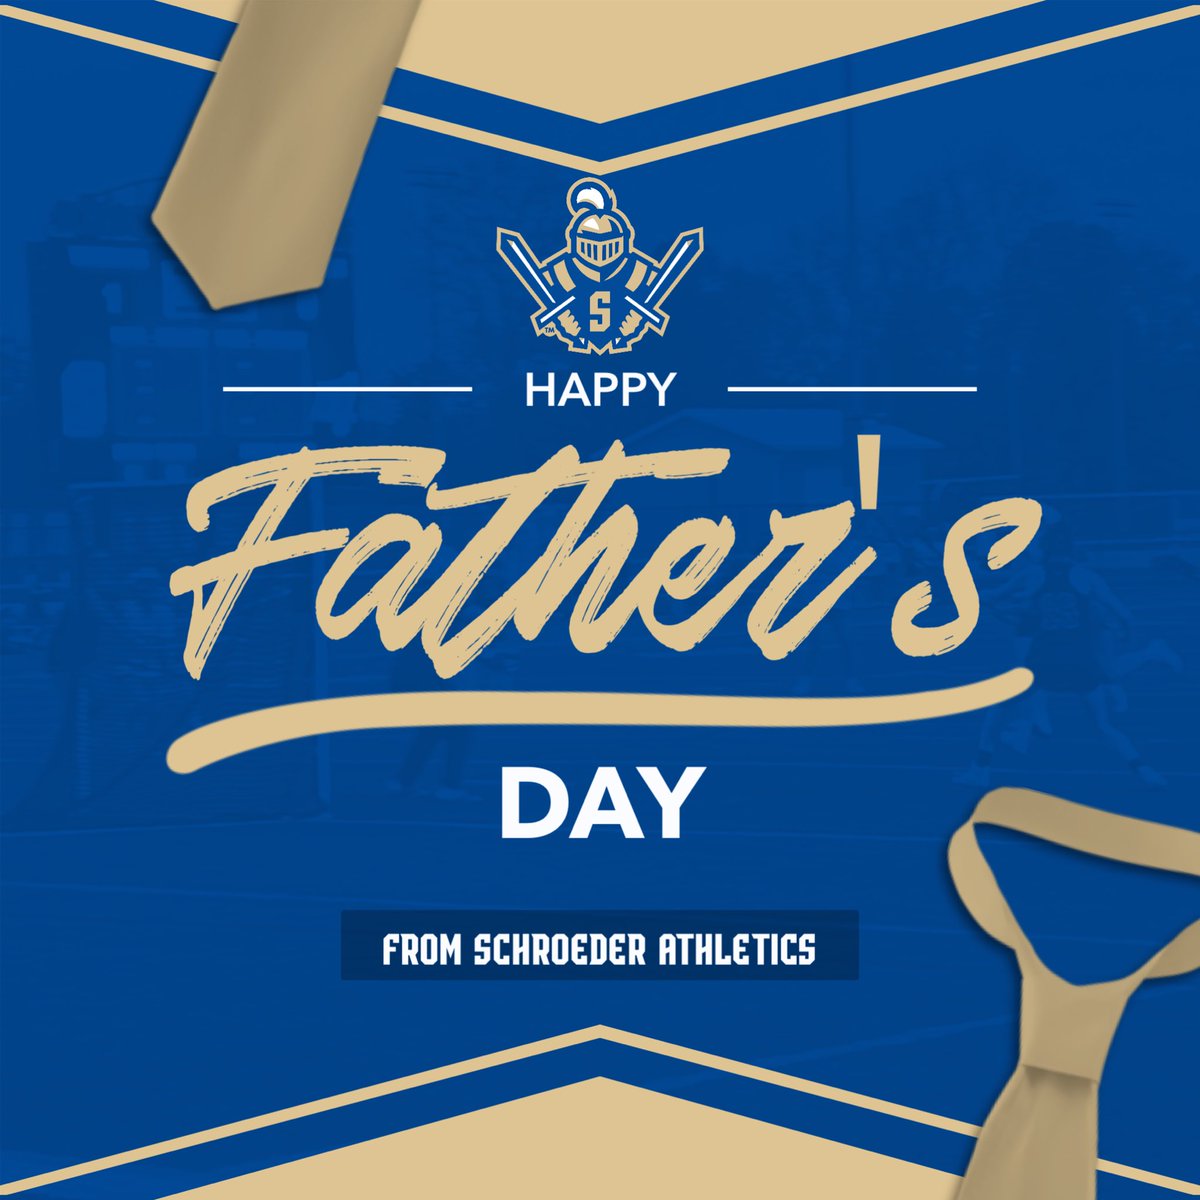 To all of our Warrior Dads… 
Thanks for all you contribute to our athletes, students, families and school!
#WarriorFamily⚔️